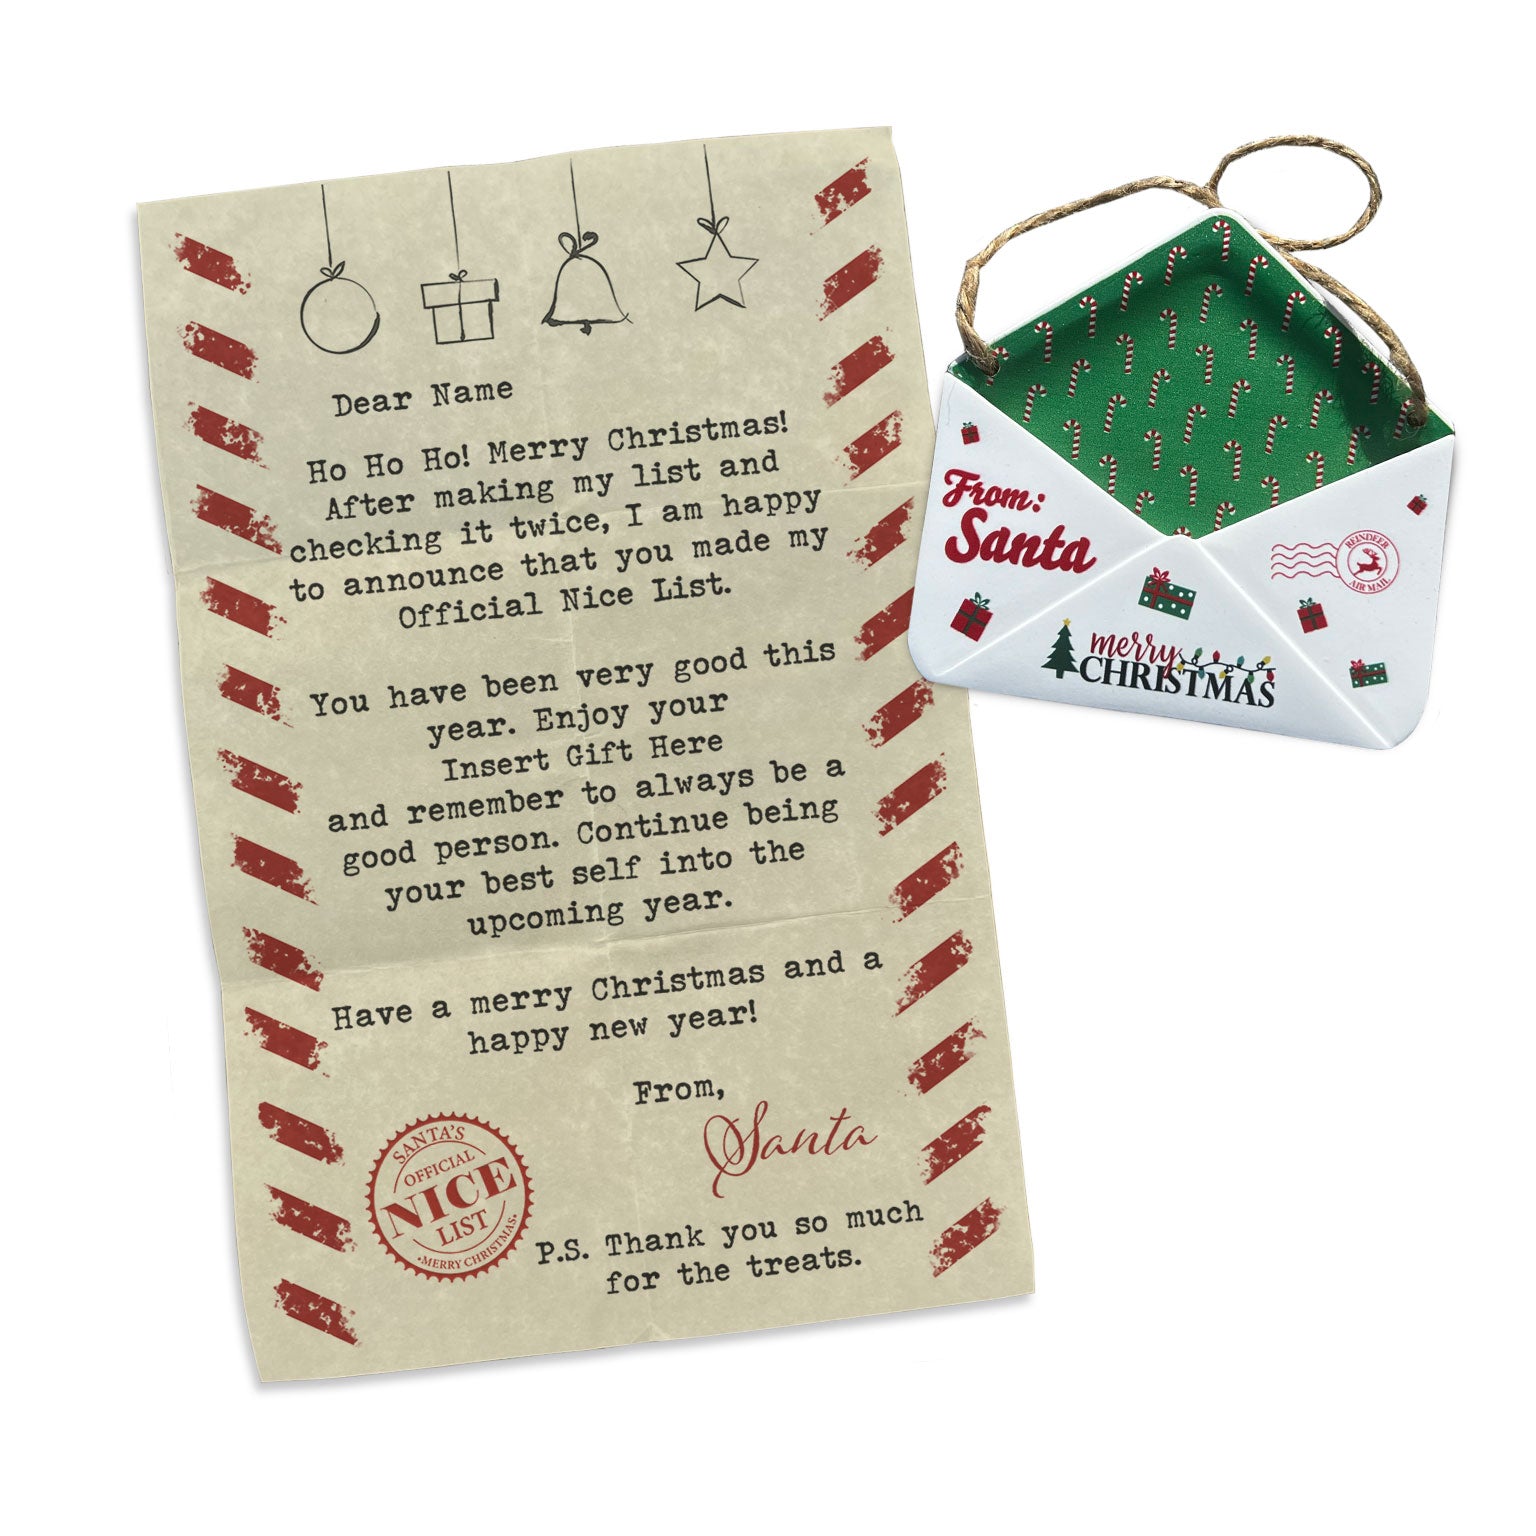 Christmas Collection (Note From Santa - Personalized) Green Candy Cane Envelope Resin Ornament with Letter